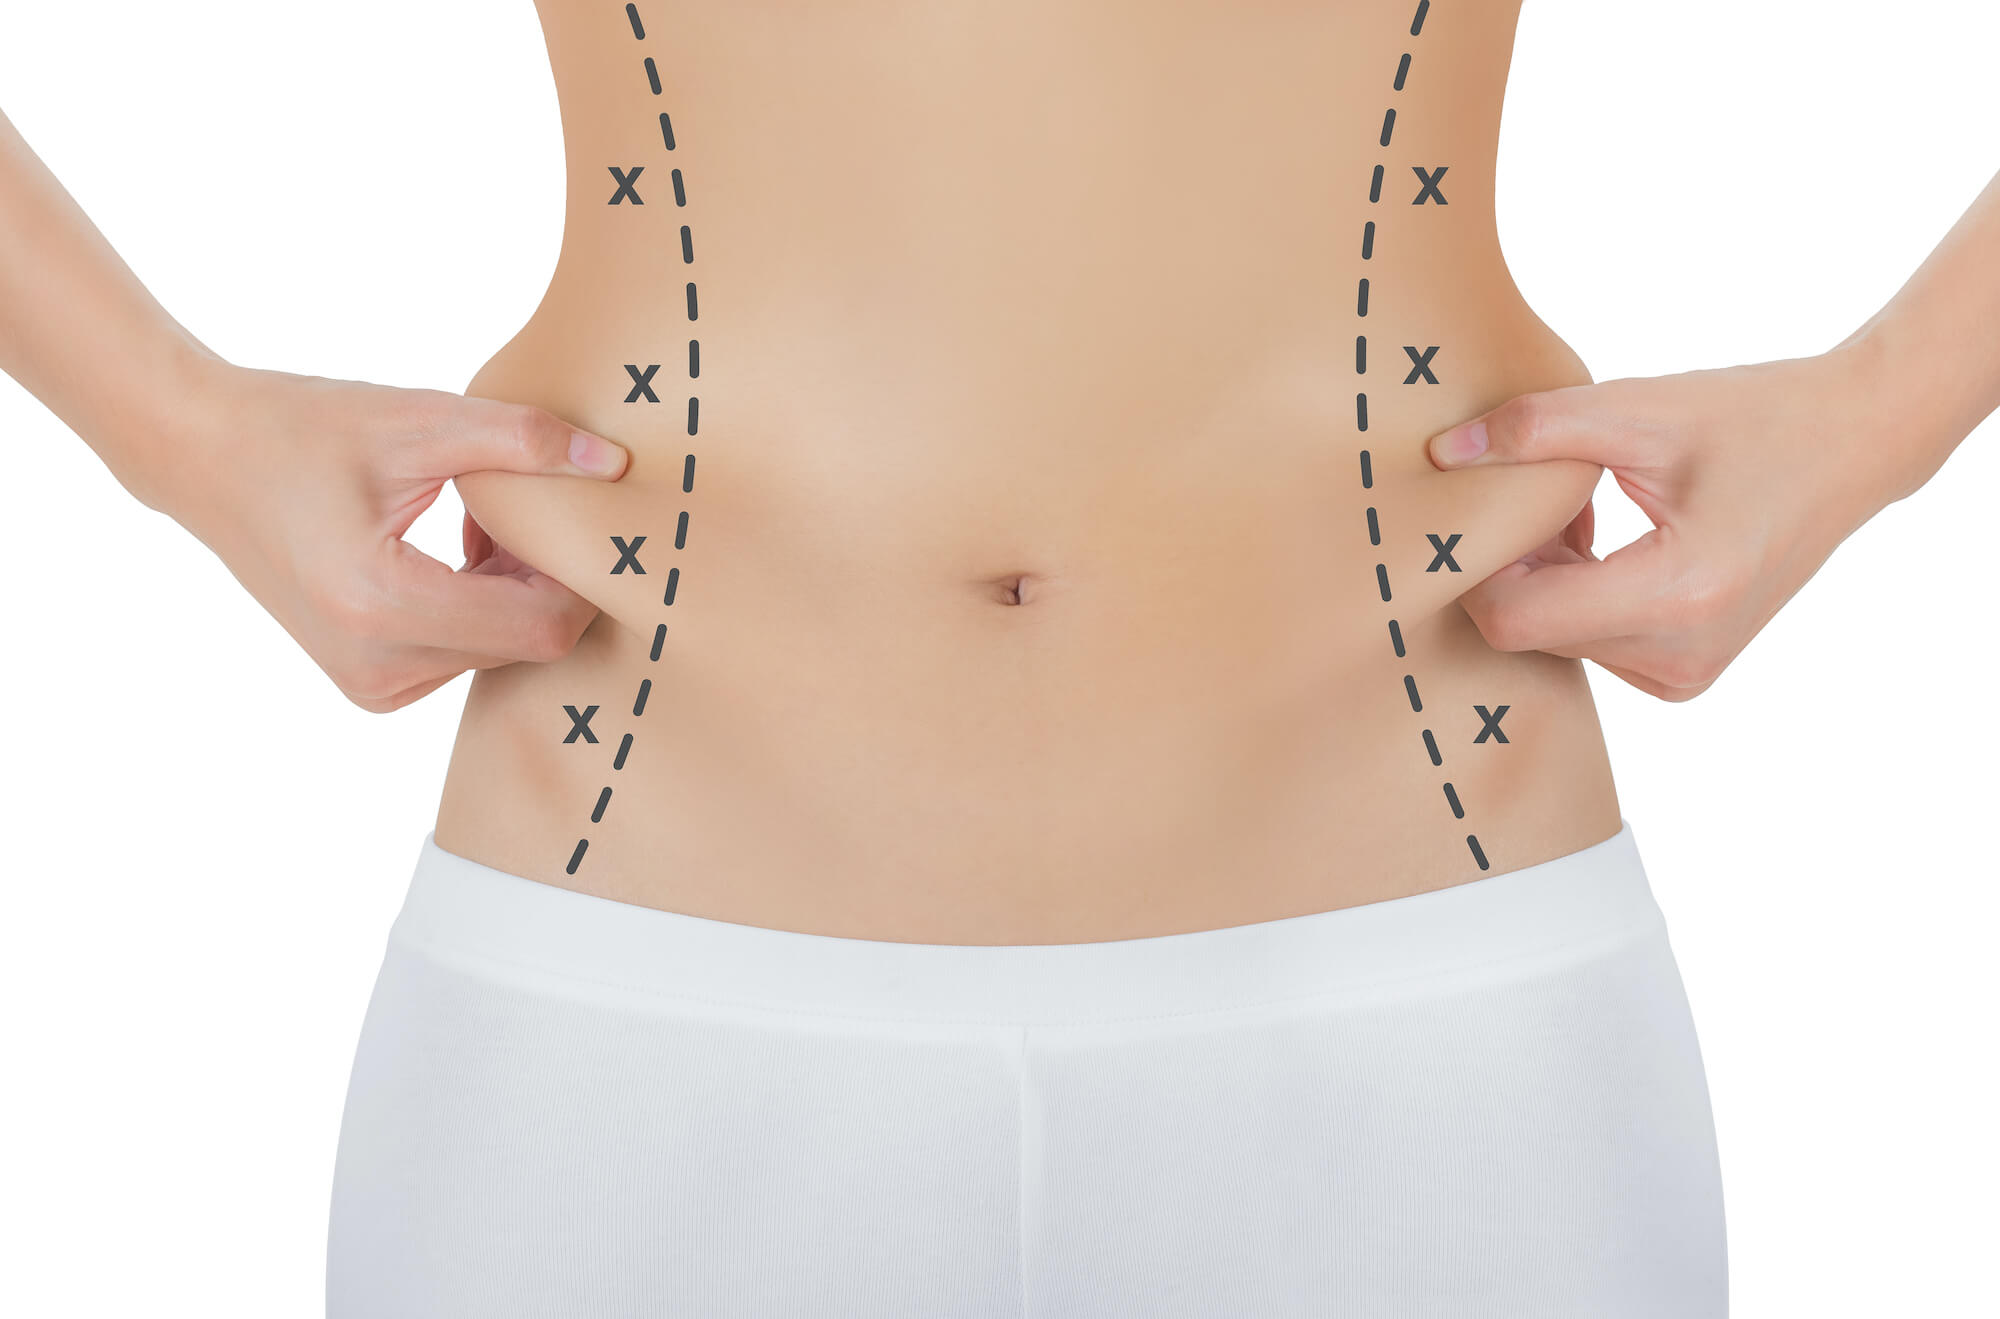 Woman's Abdomen With Lines Drawn for Liposuction Surgery